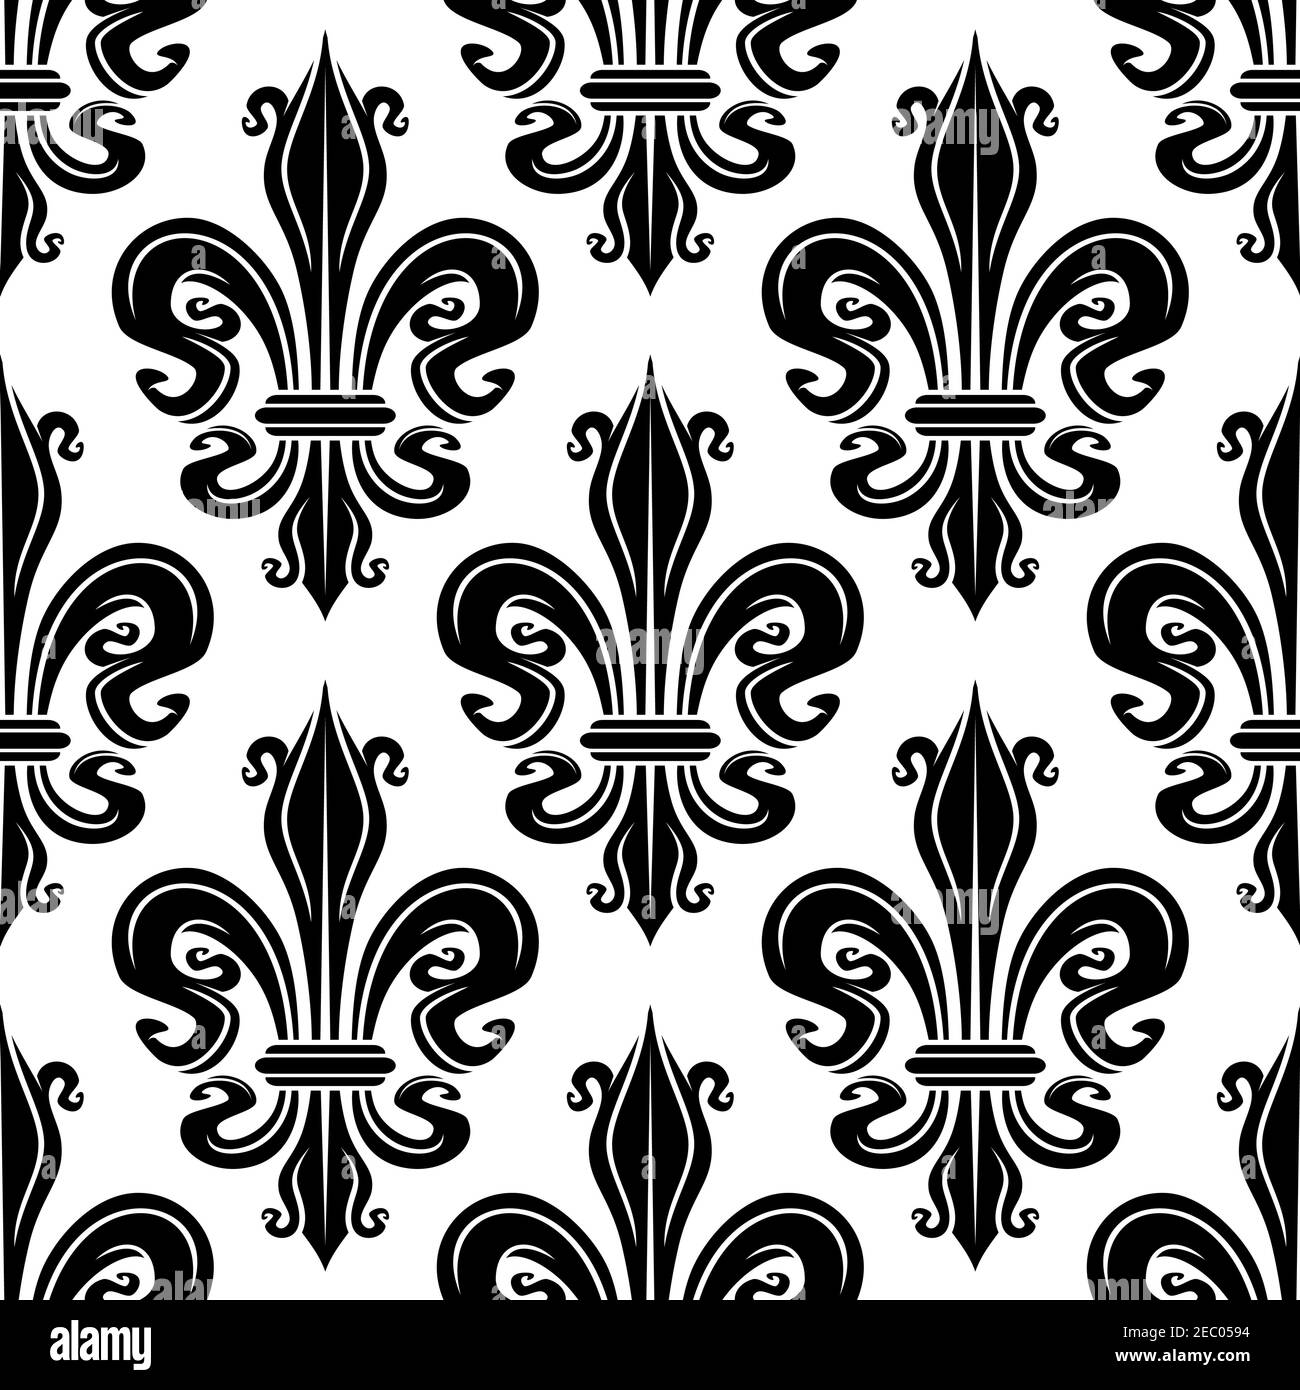 Seamless french royal lilies black and white floral pattern of ornamental fleur-de-lis elements. Use as vintage wallpaper, fabric or interior accessor Stock Vector